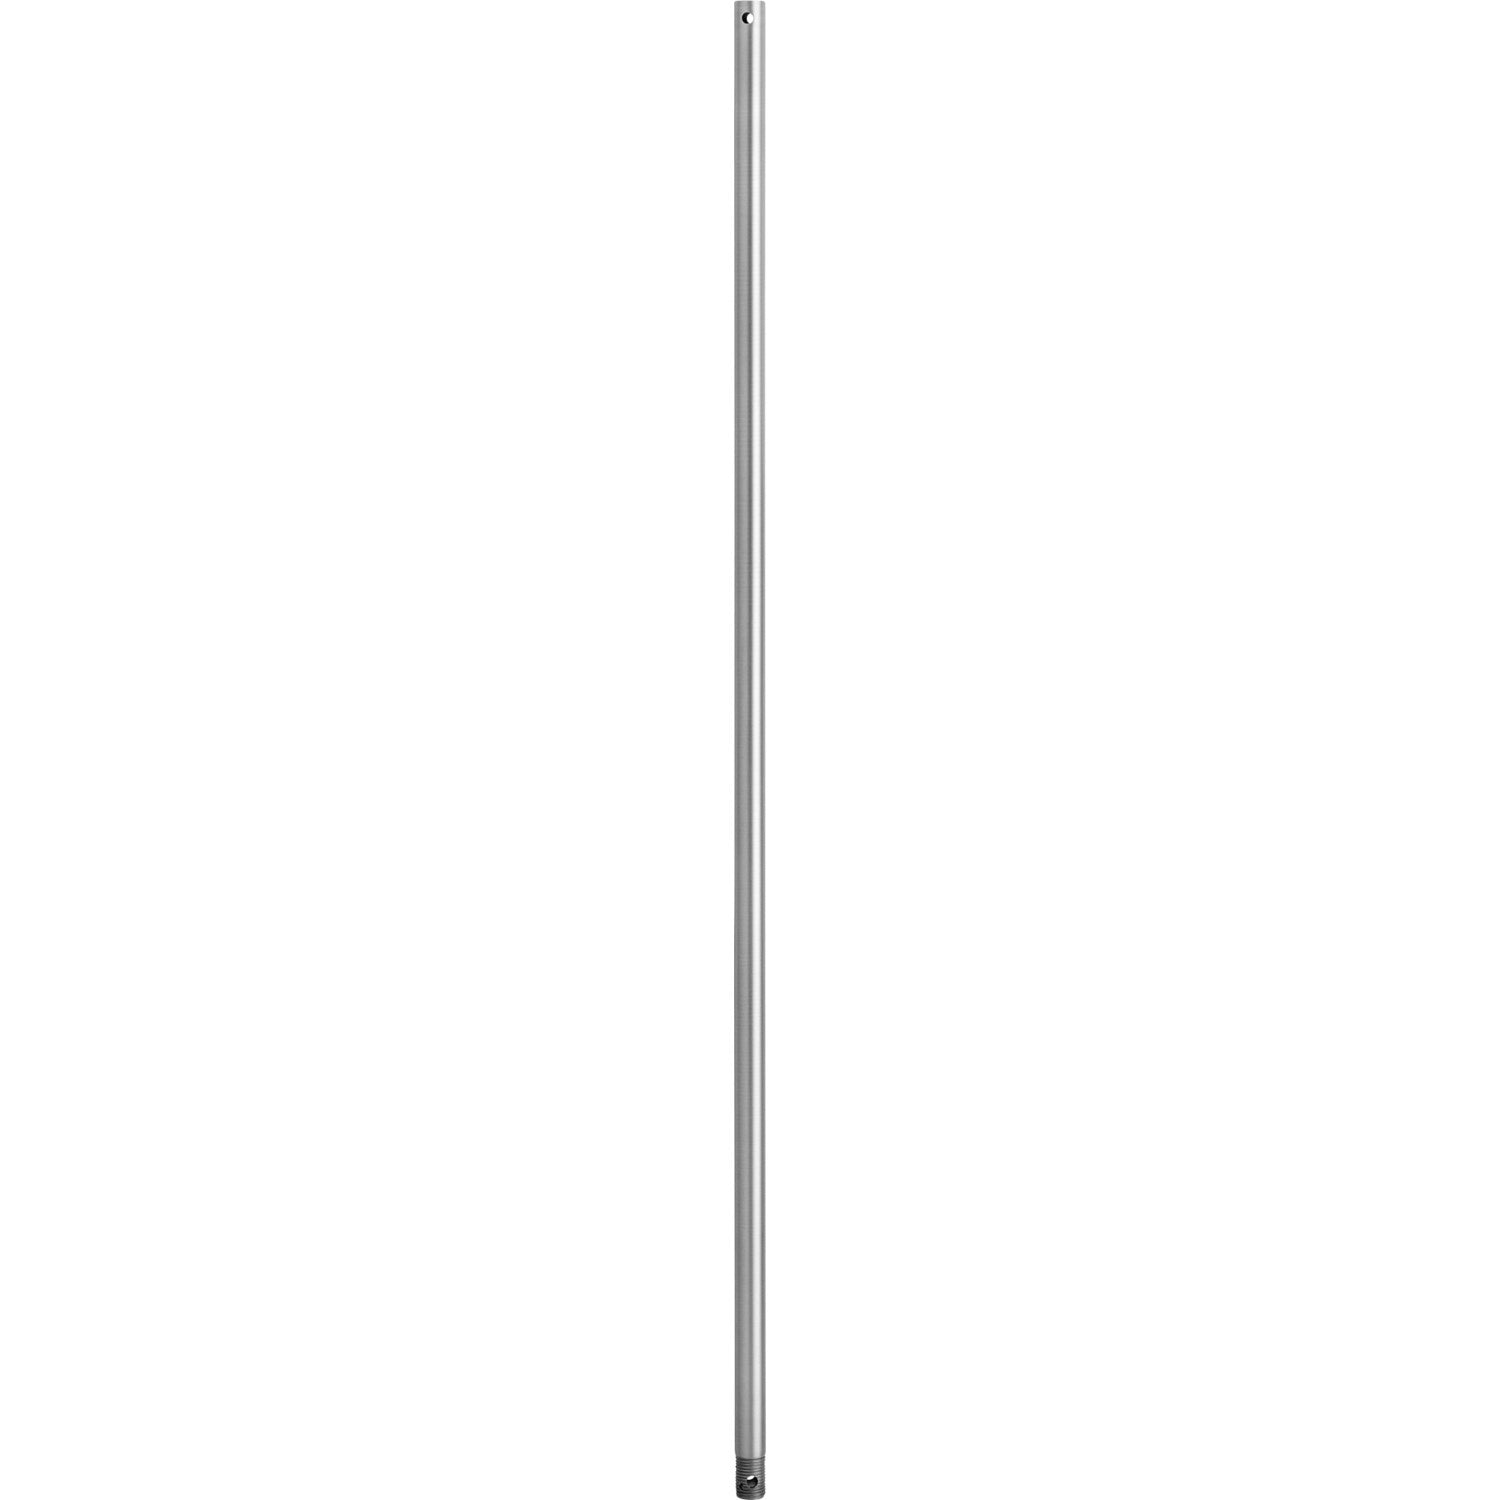 Quorum - 6-3692 - Downrod - 36 in. Downrods - Antique Silver